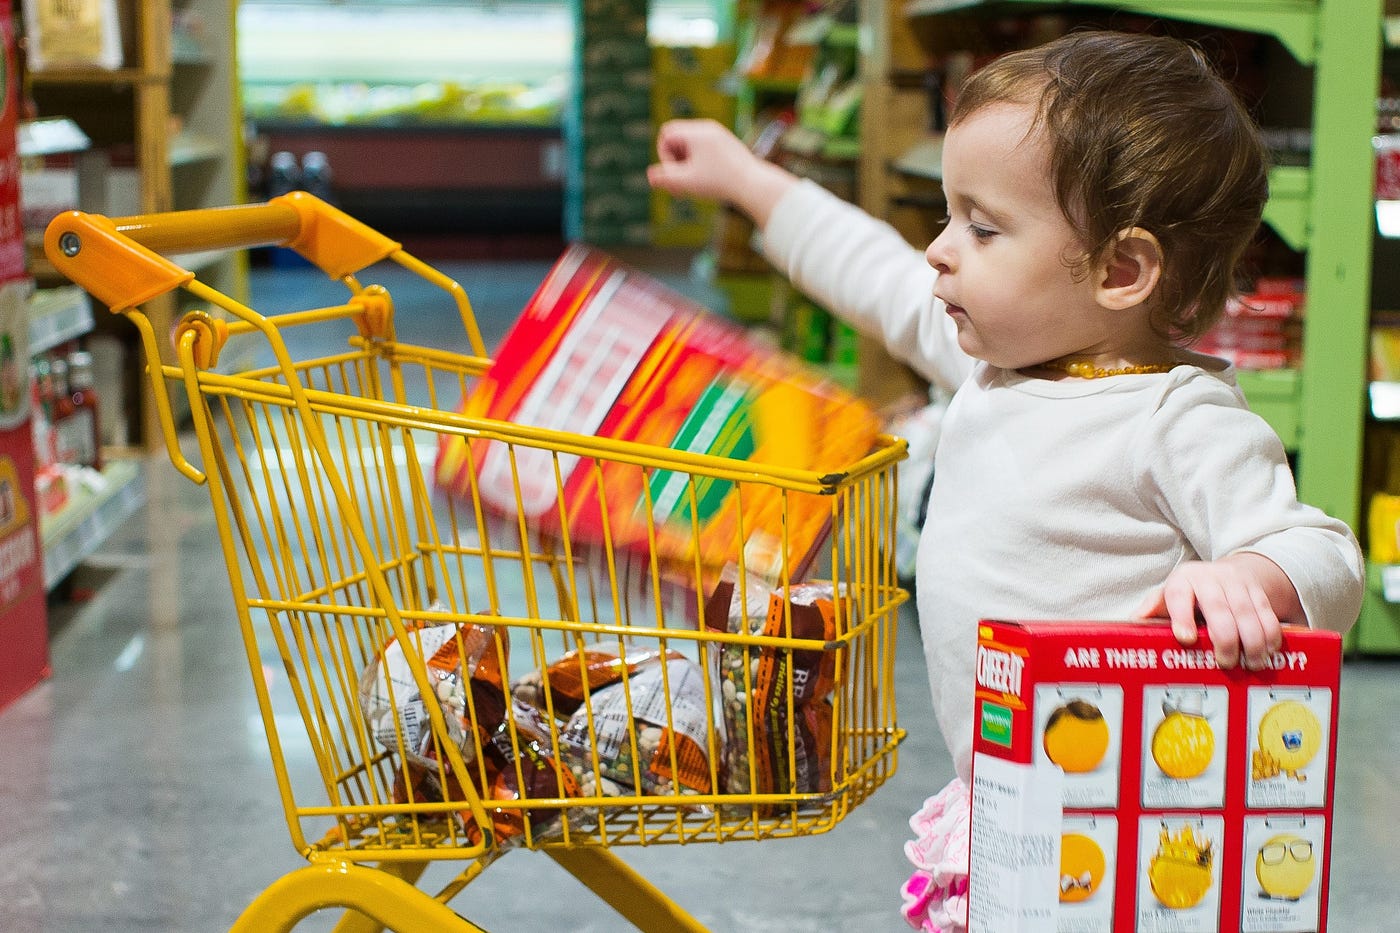 Toddler drops box of crackers into a small yellow shopping cart in a grocery store